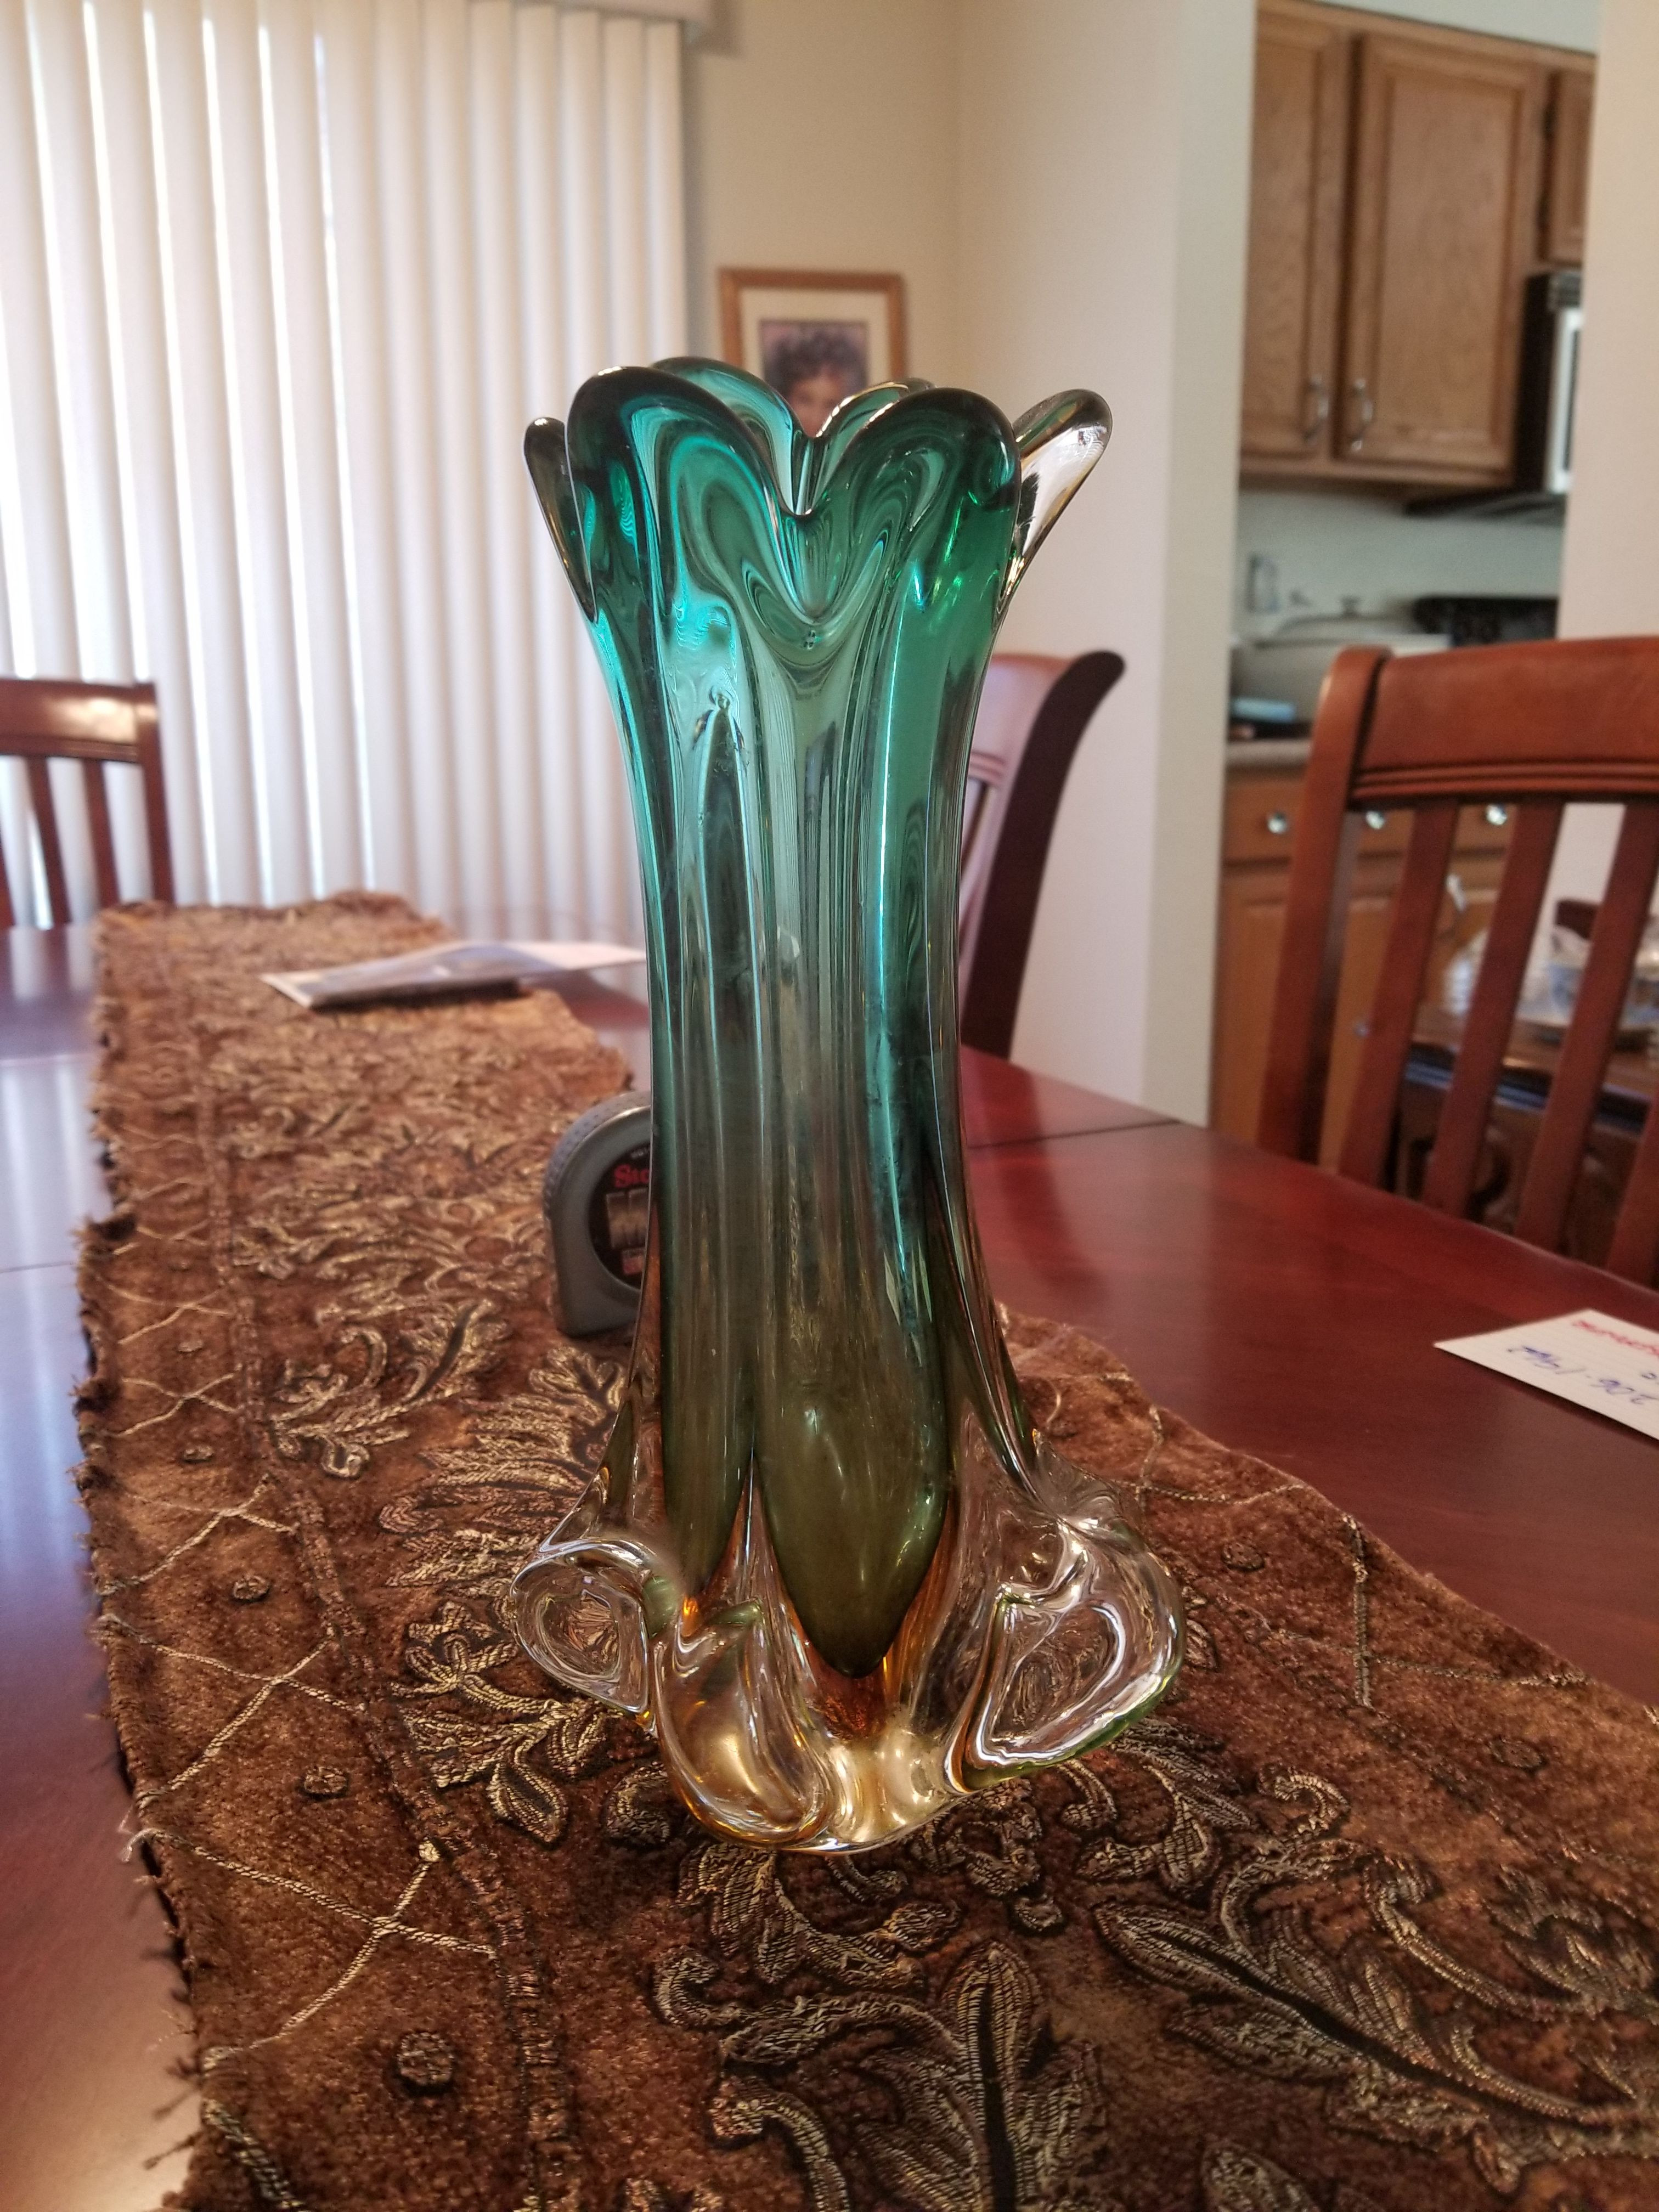 22 Spectacular Daum Nancy Vase Prices 2024 free download daum nancy vase prices of what is the value of this vase it is approximately 11 high and in 20180517 132000